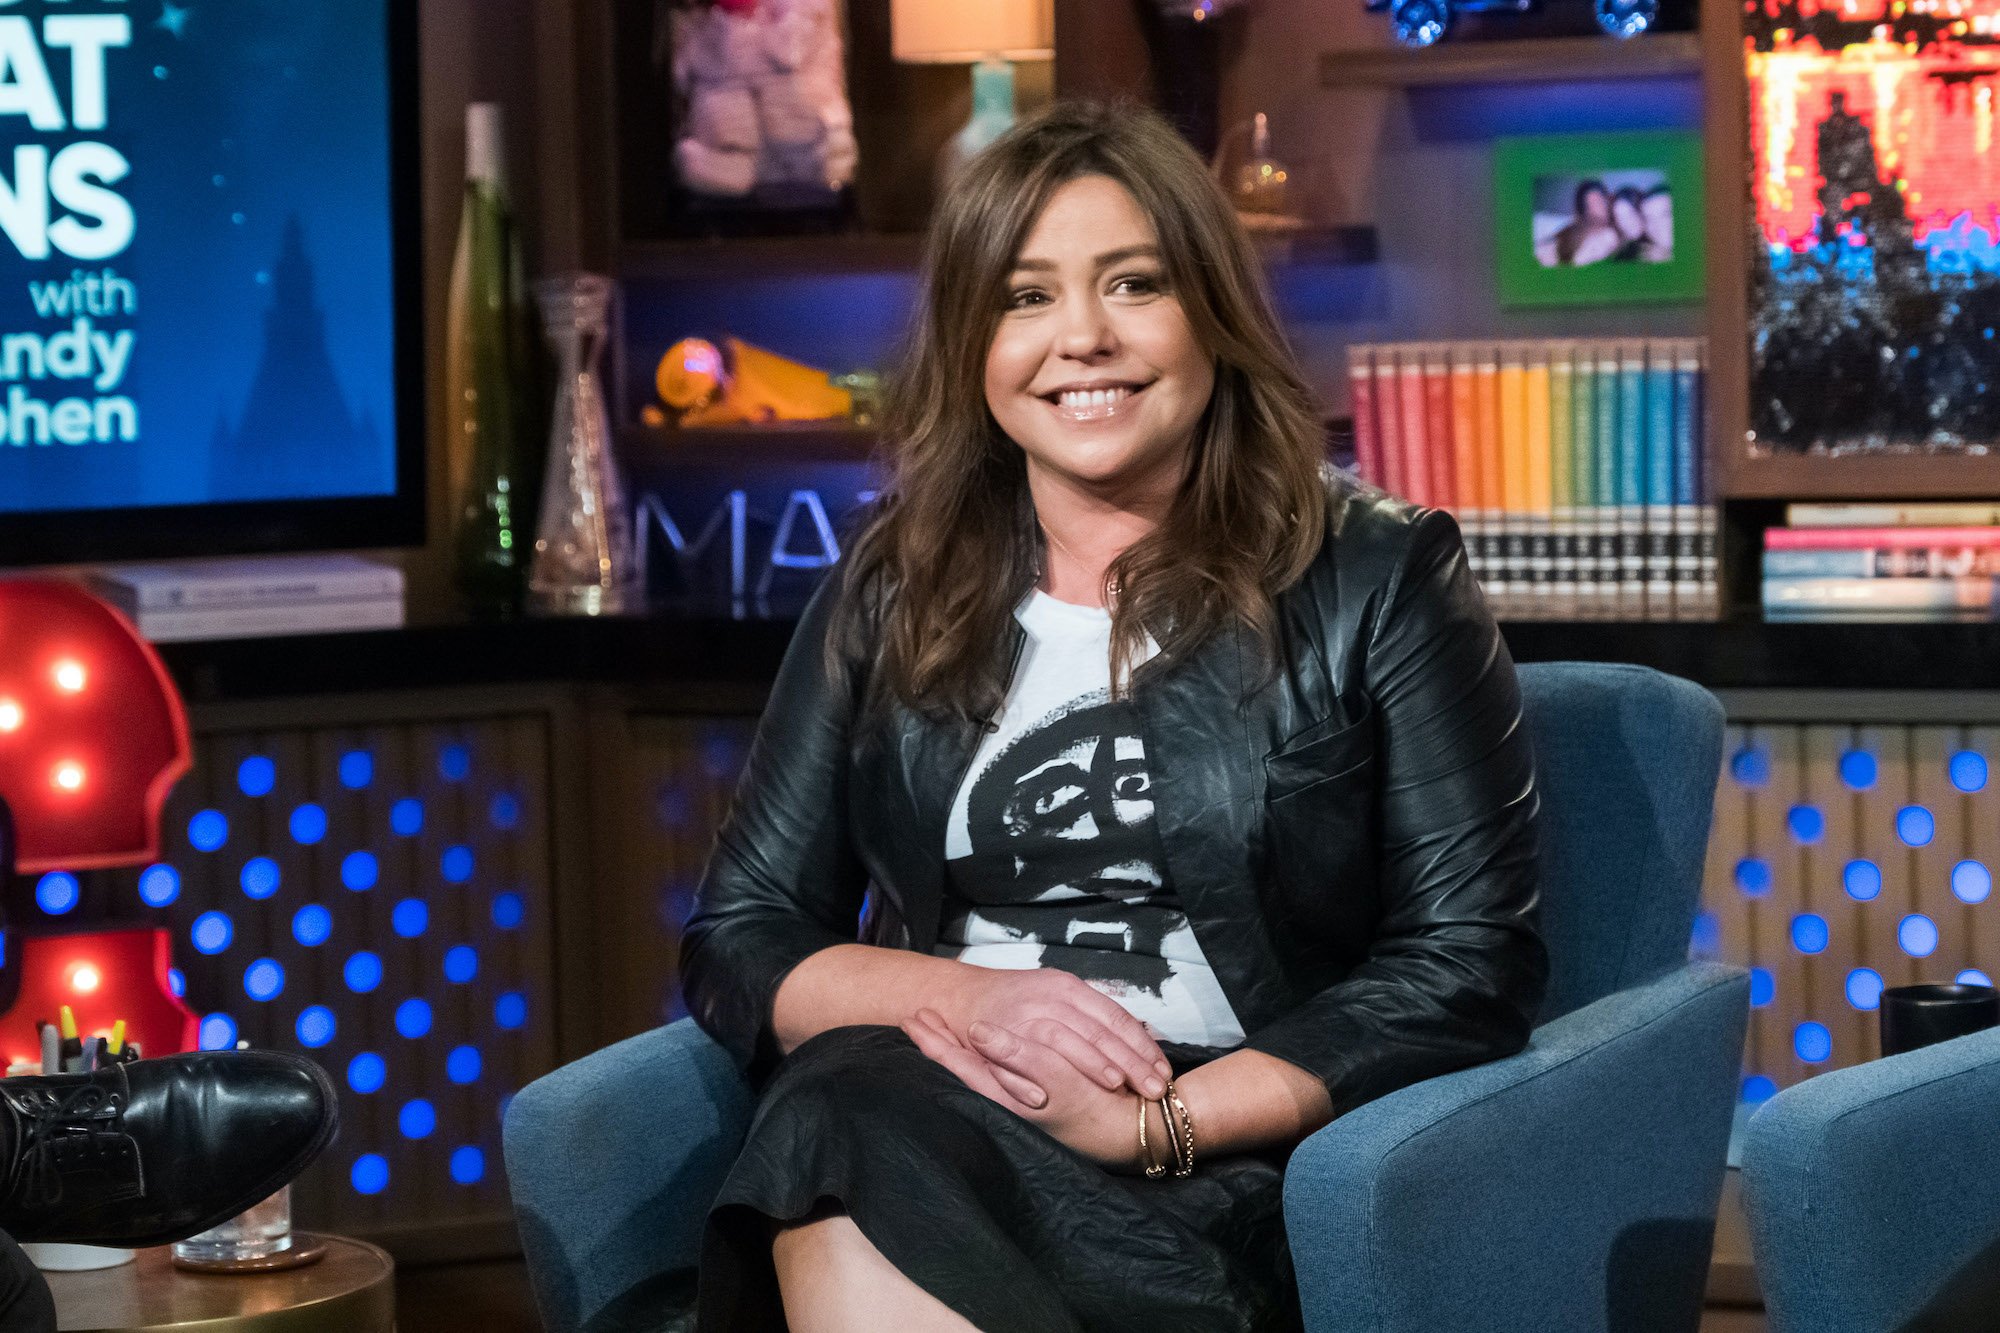 Rachael Ray Brings Her Own Condiments to Yankees Games: ‘I’m the Chick Who Smells like Onions’